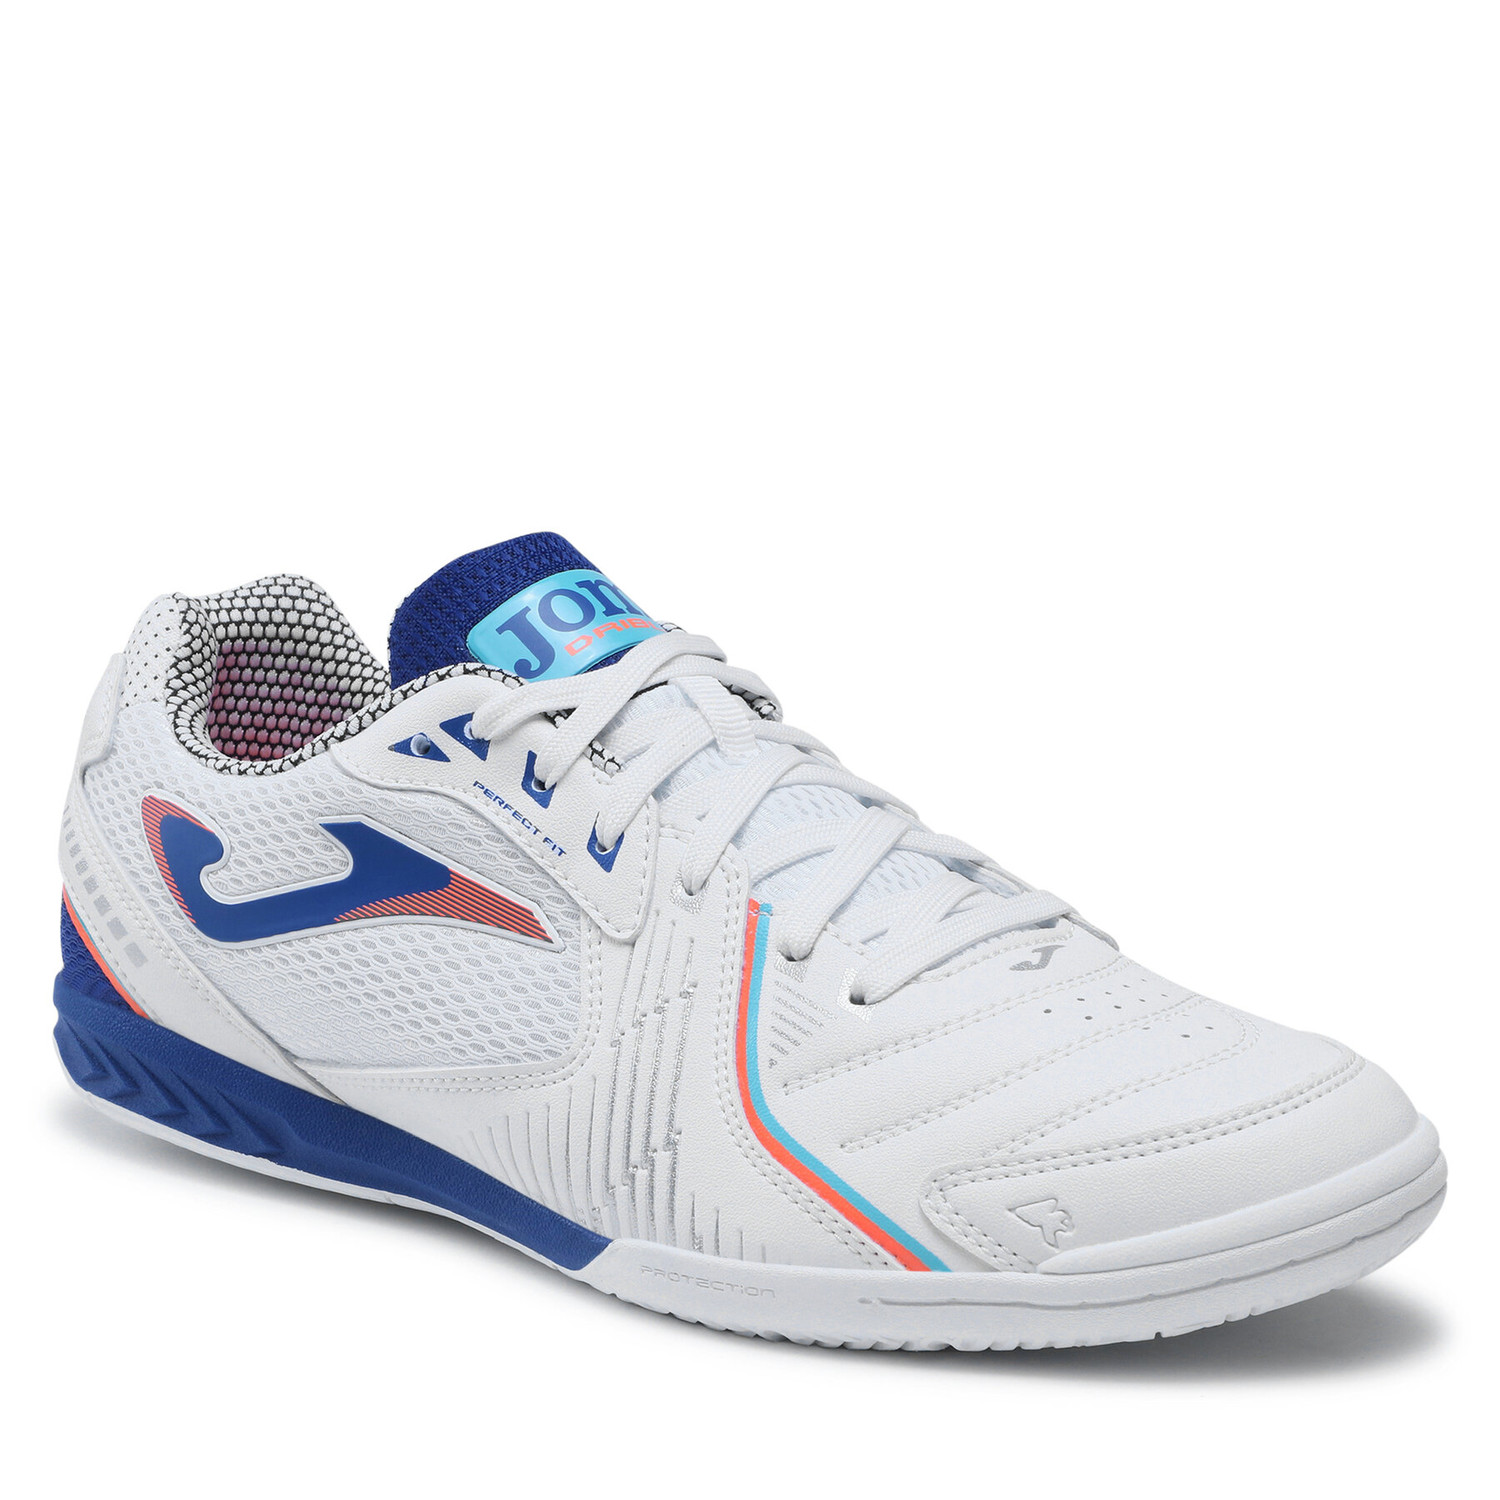 Boty Joma Dribling 2302 DRIW2302IN White Navy